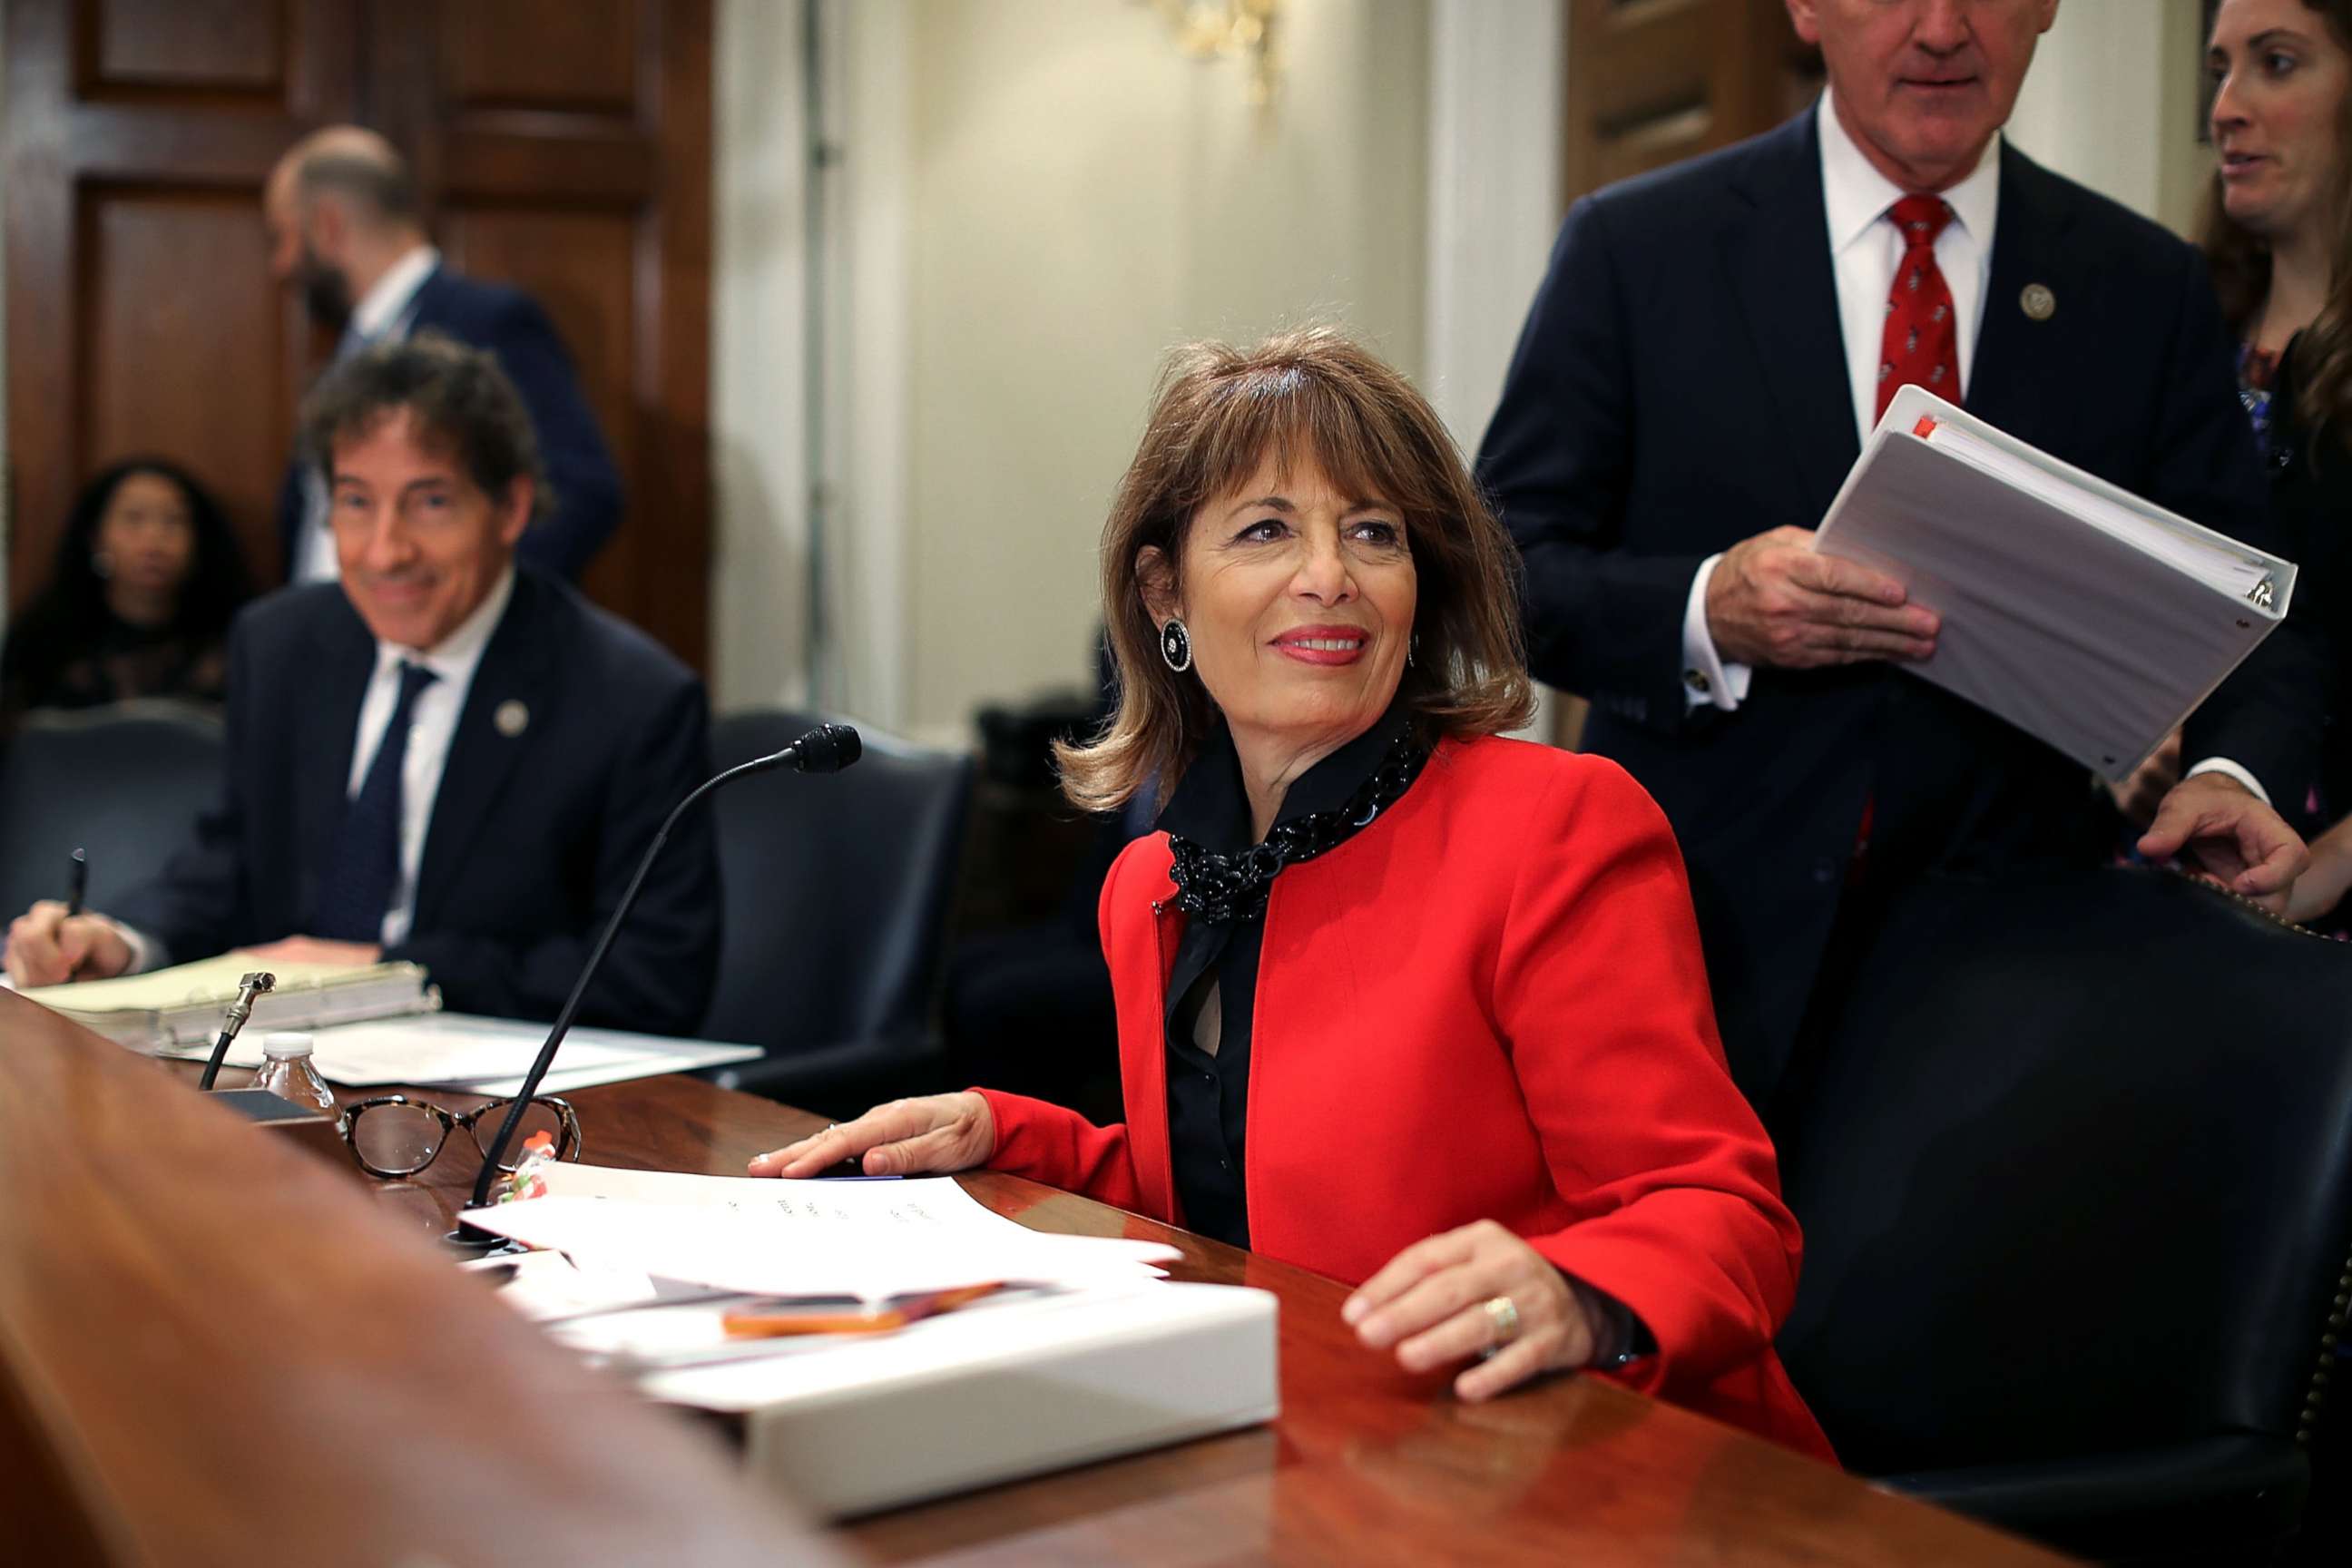 PHOTO: Rep. Jackie Speier joins members of the House Administration Committee during a hearing on preventing sexual harassment in Congress in the Longworth House Office Building on Capitol Hill December 7, 2017 in Washington, DC.